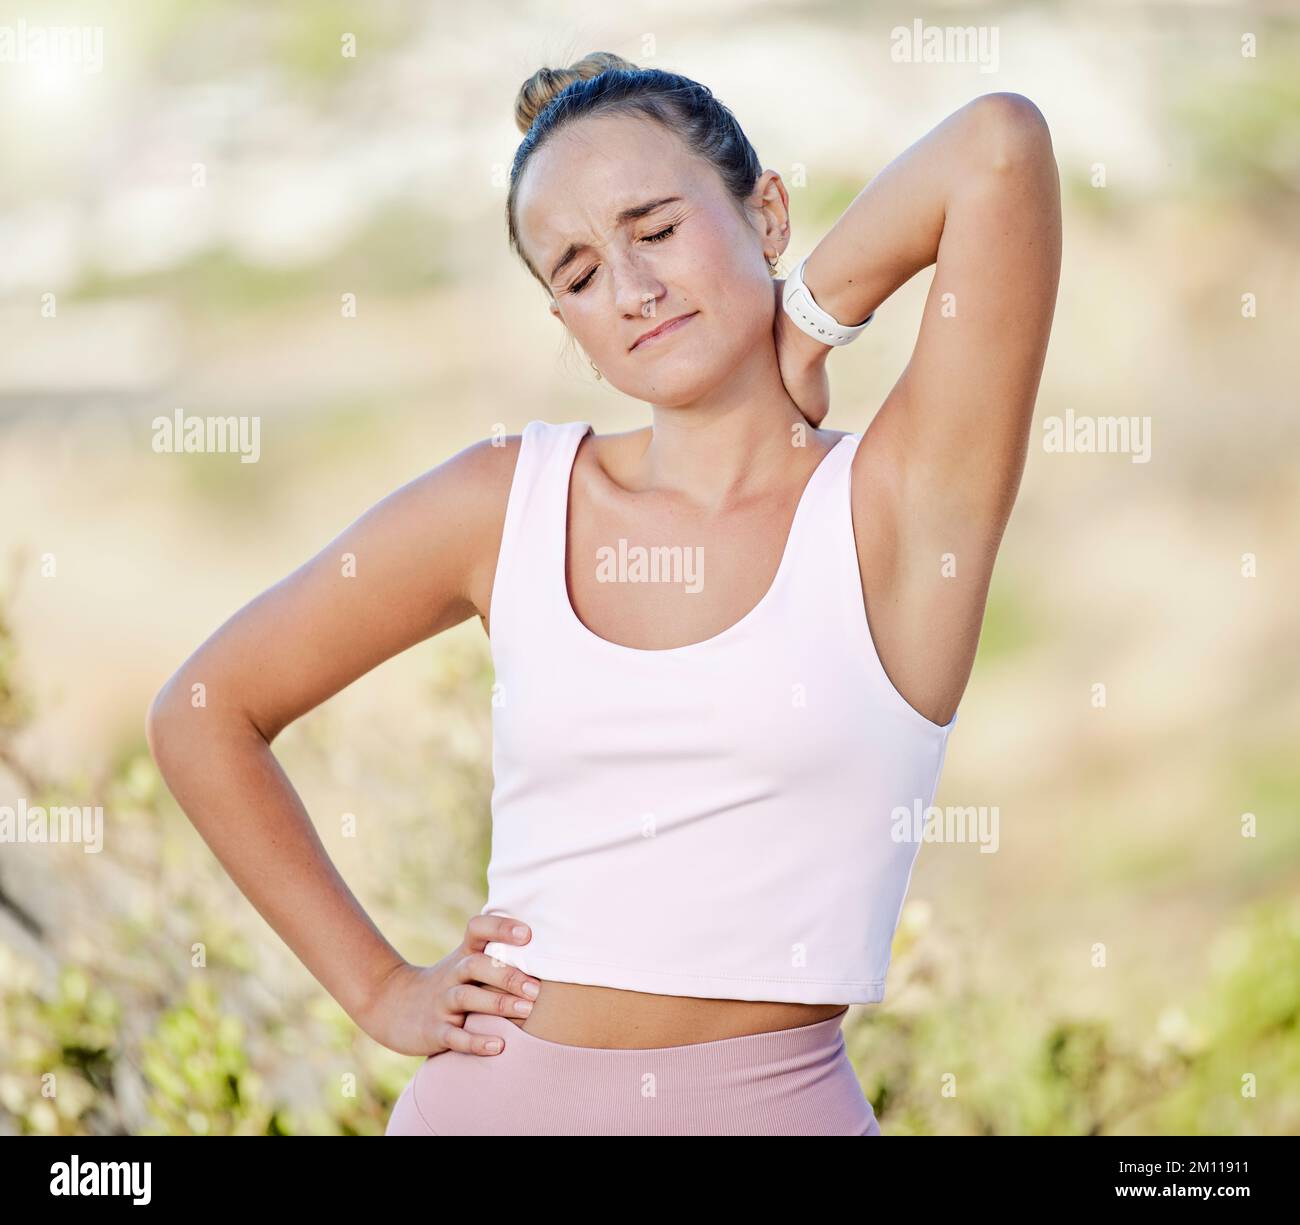 Woman, neck pain or muscle stress in fitness, workout or training in nature park, countryside environment or public garden. Runner, sports athlete or Stock Photo